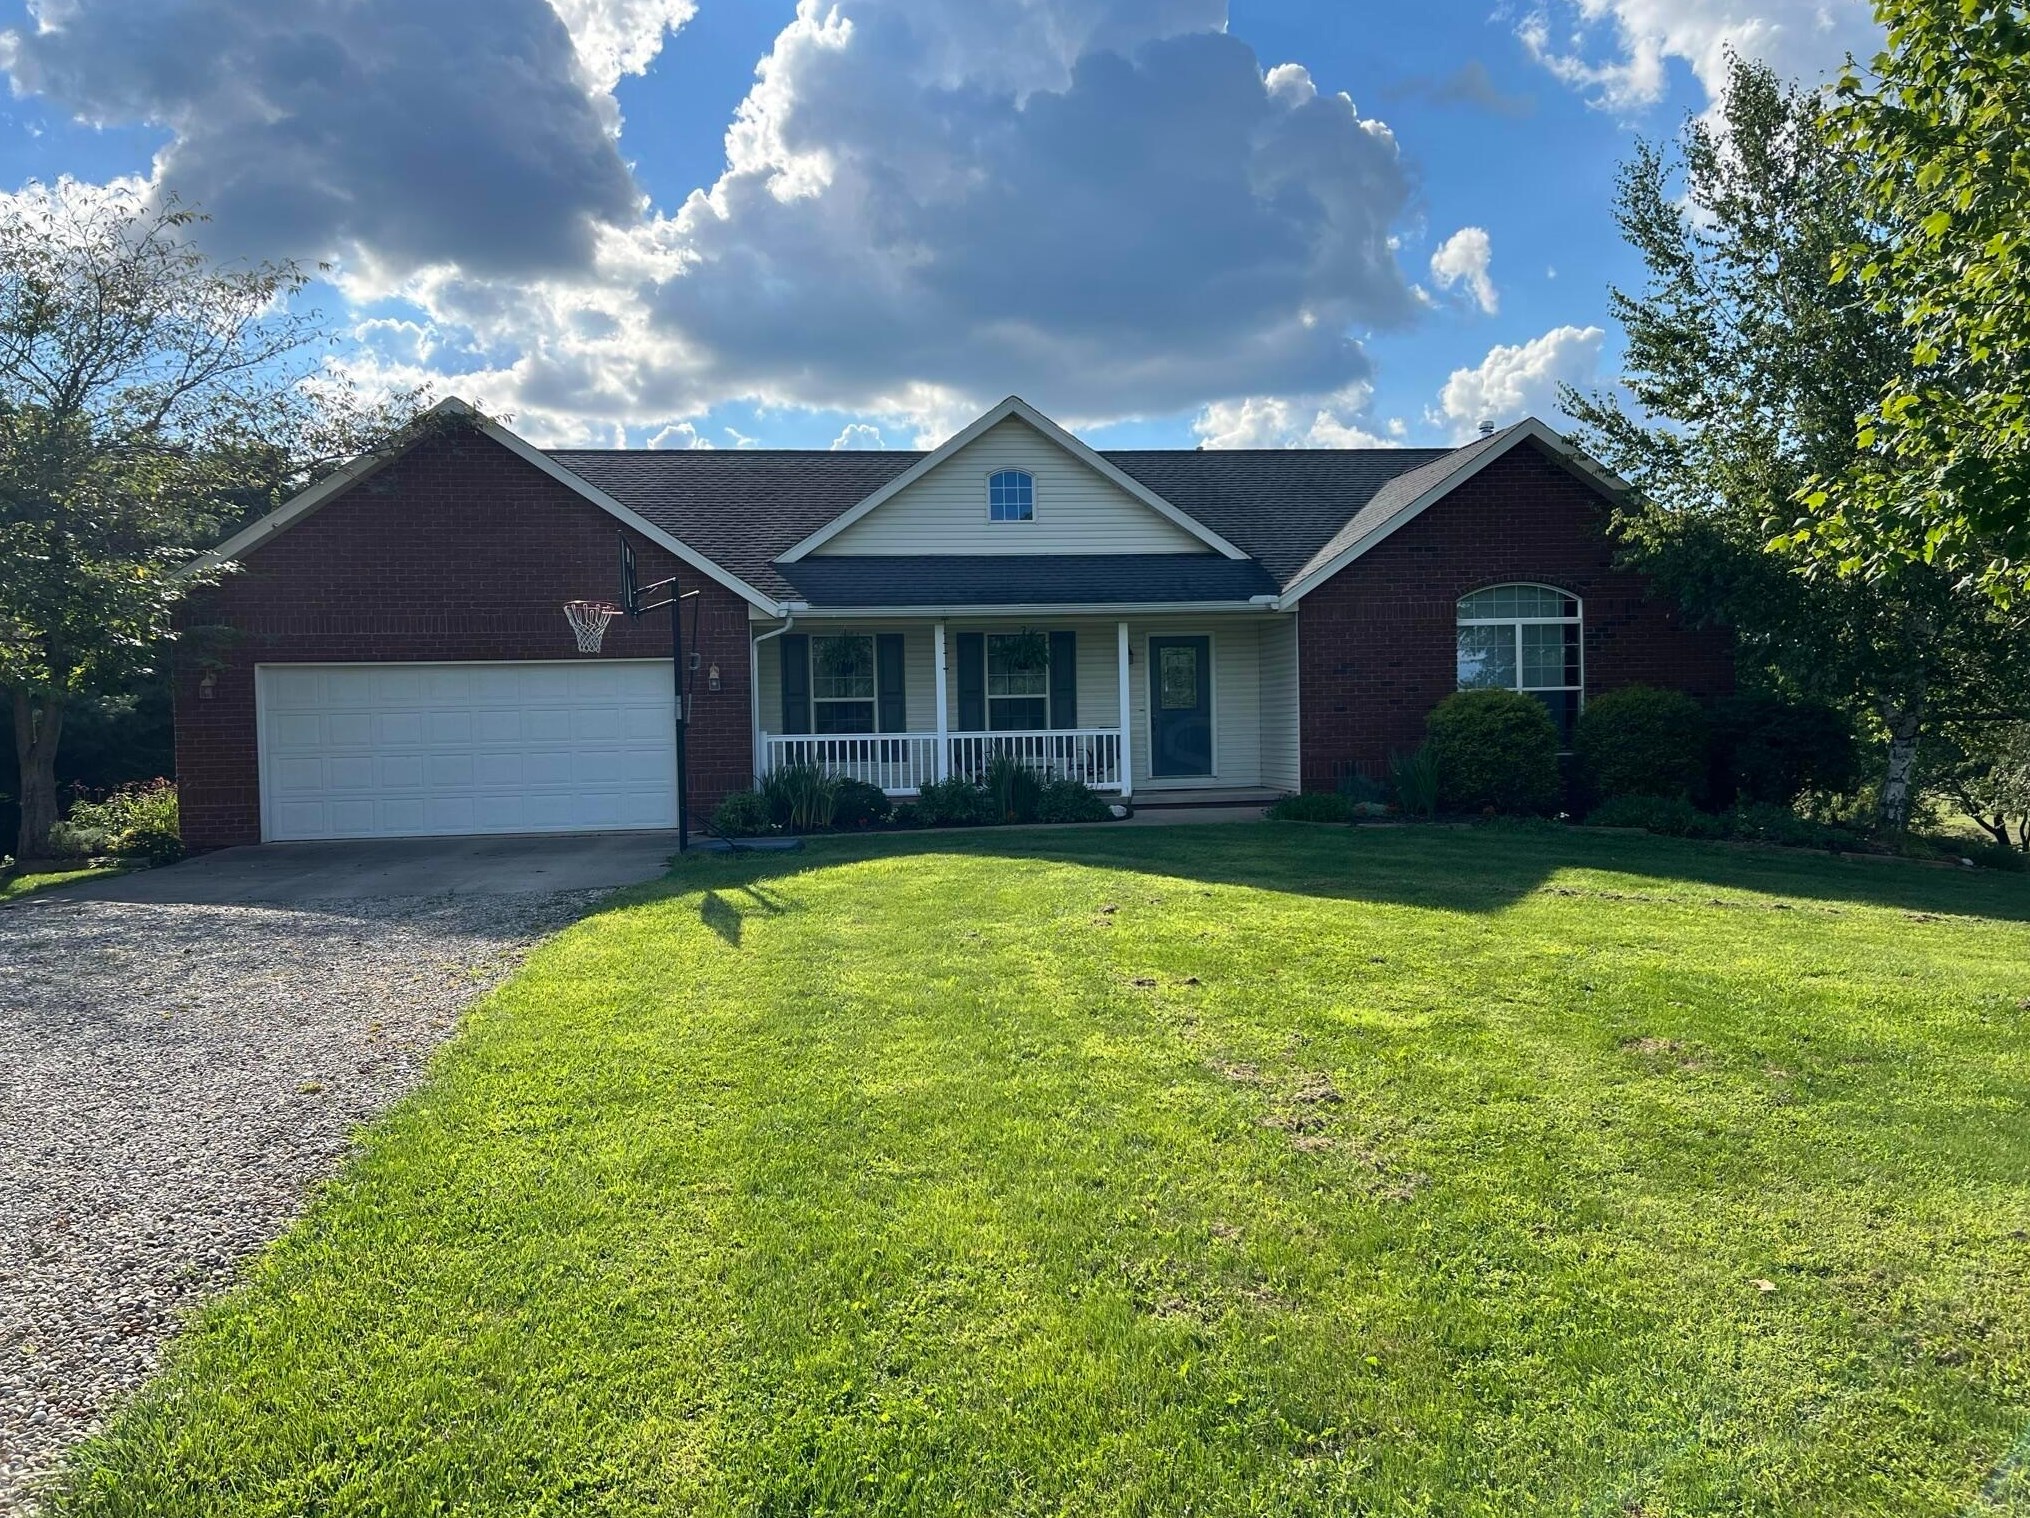 11463 Colwill Rd, Gambier, OH 43022